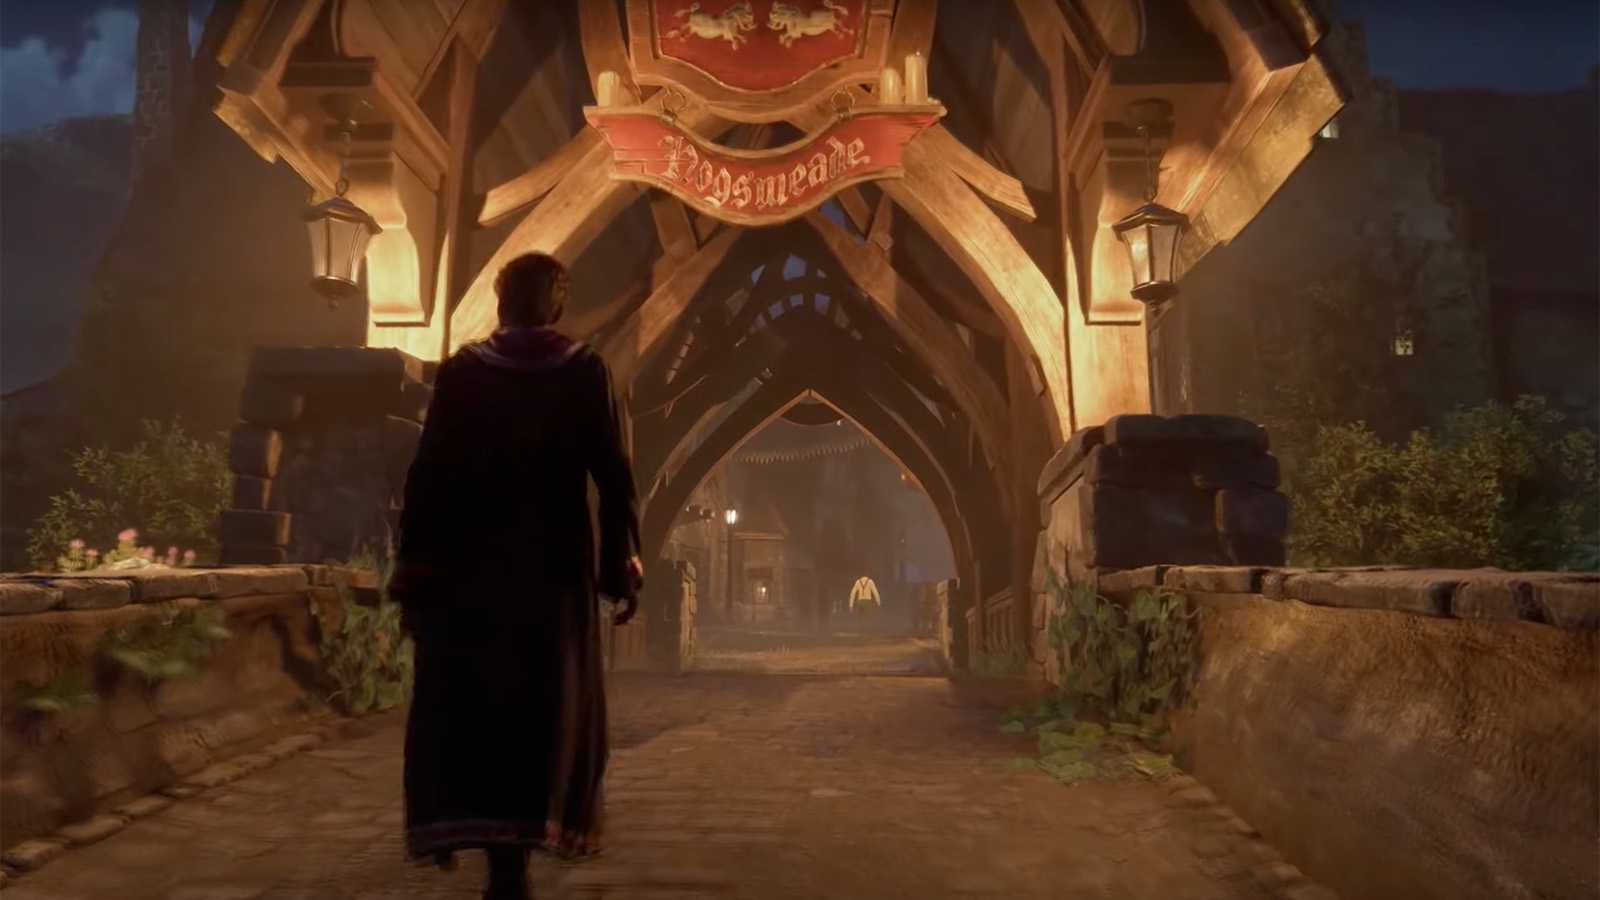 Hogwarts Legacy PS4 ( Exclusive) : .co.uk: PC & Video